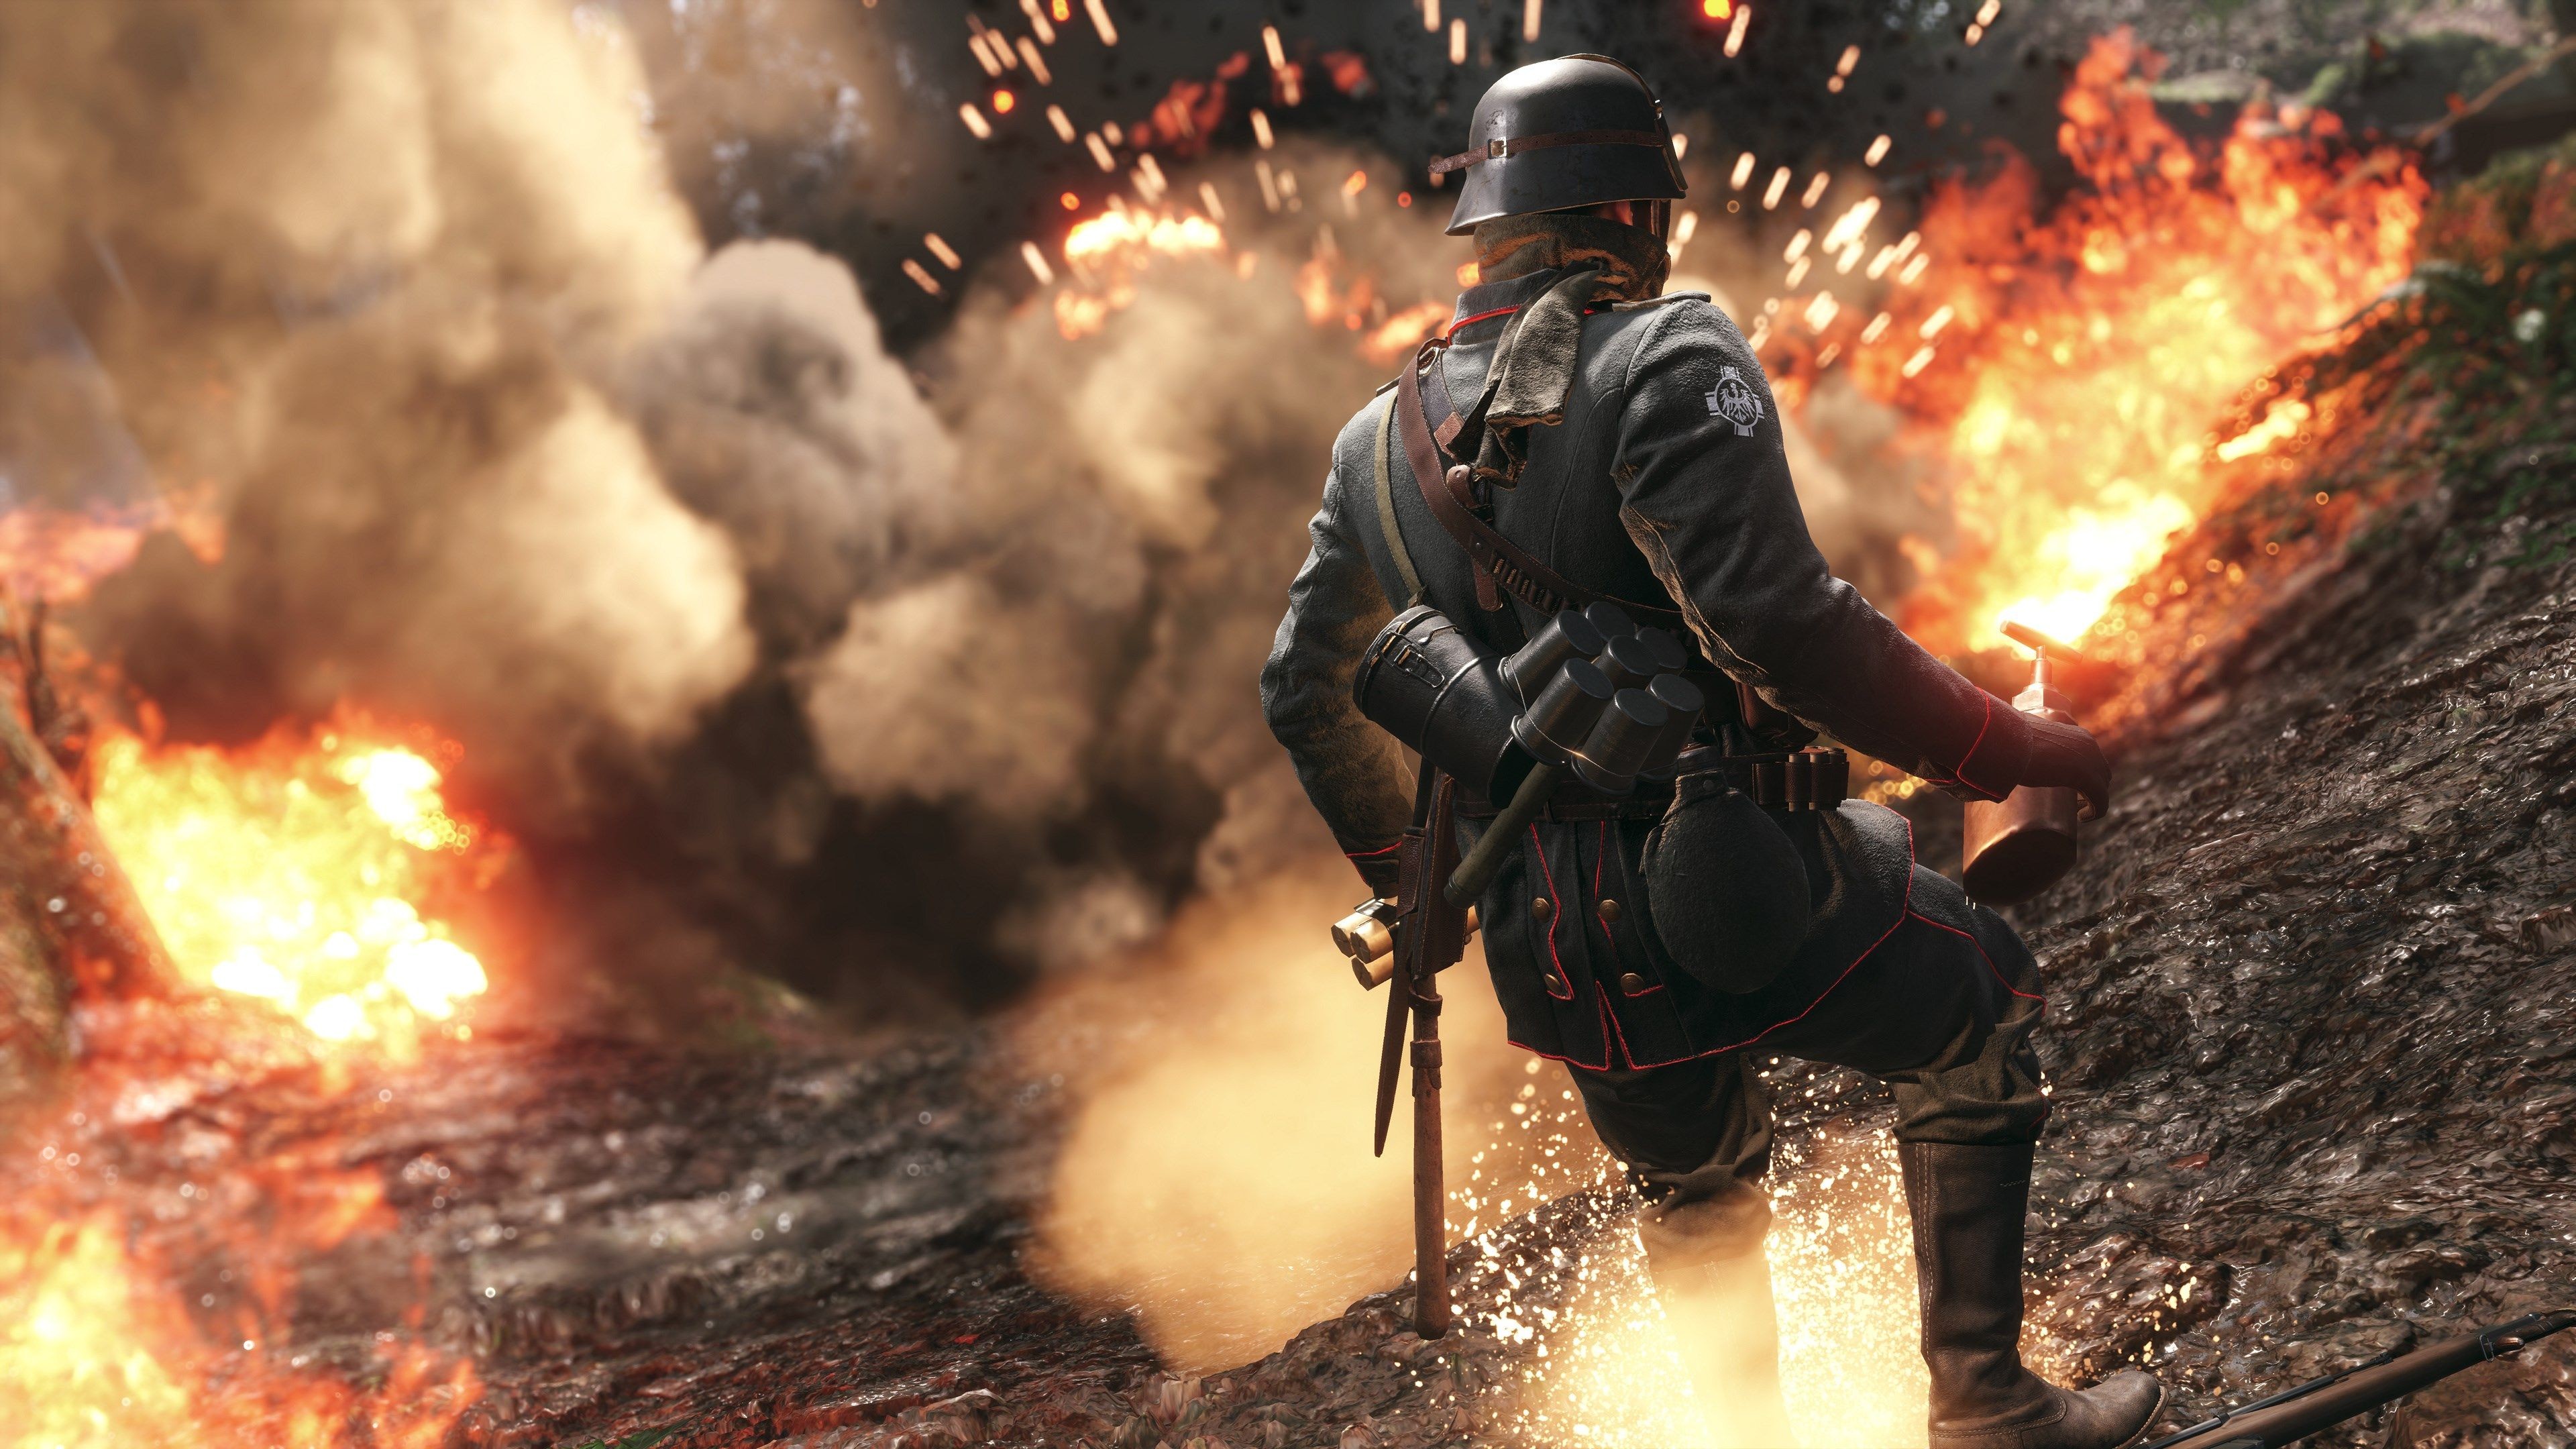 battlefield 1 wallpaper 4k,action adventure game,pc game,movie,shooter game,event